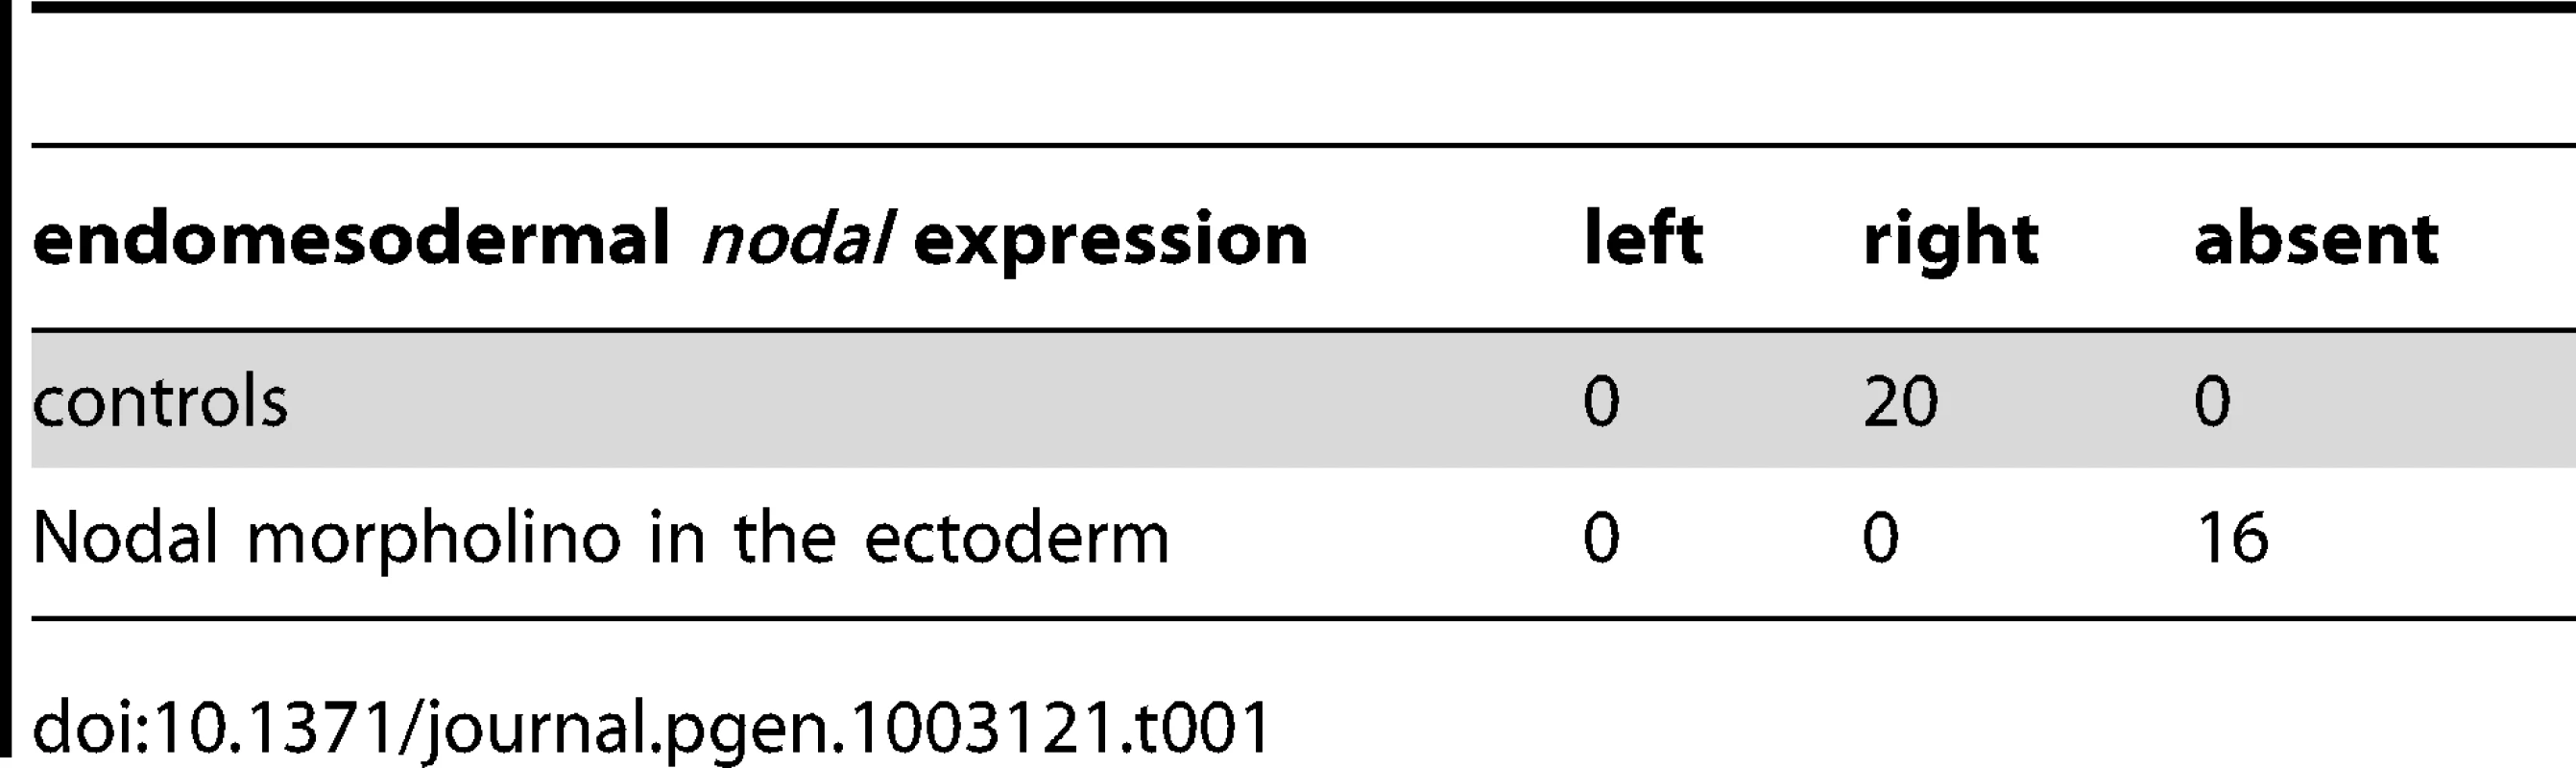 Expression of &lt;i&gt;nodal&lt;/i&gt; in the endomesoderm following inhibition of Nodal signaling in the ectoderm.